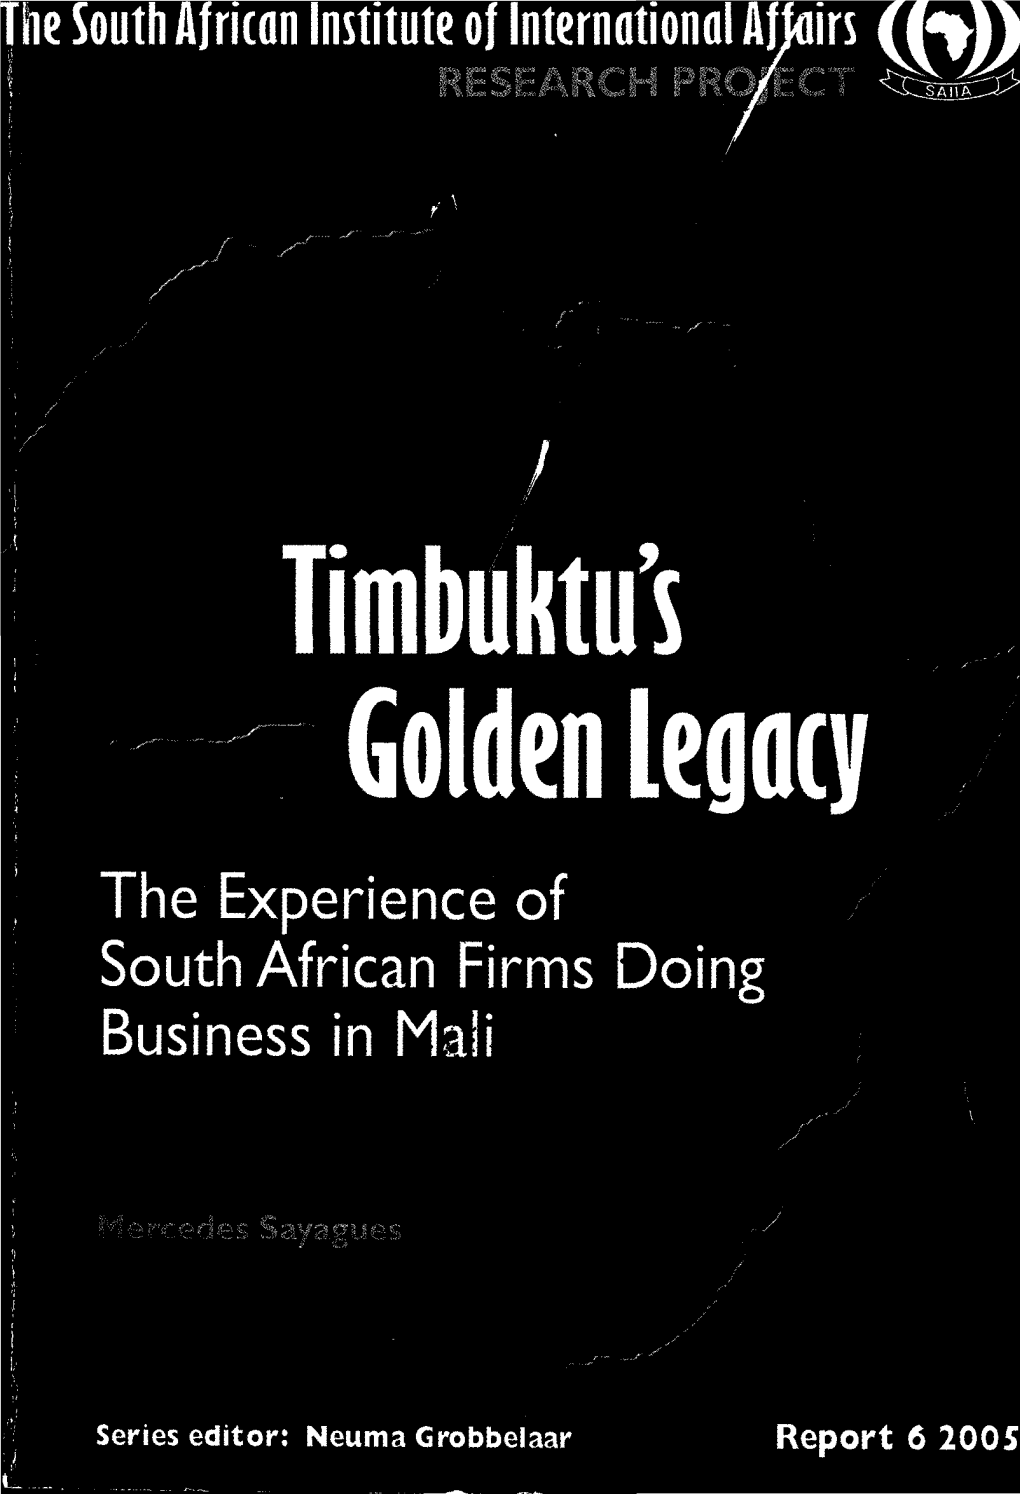 Timbuktu's Golden Legacy the Experience of South African Firms Doing Business in Mali